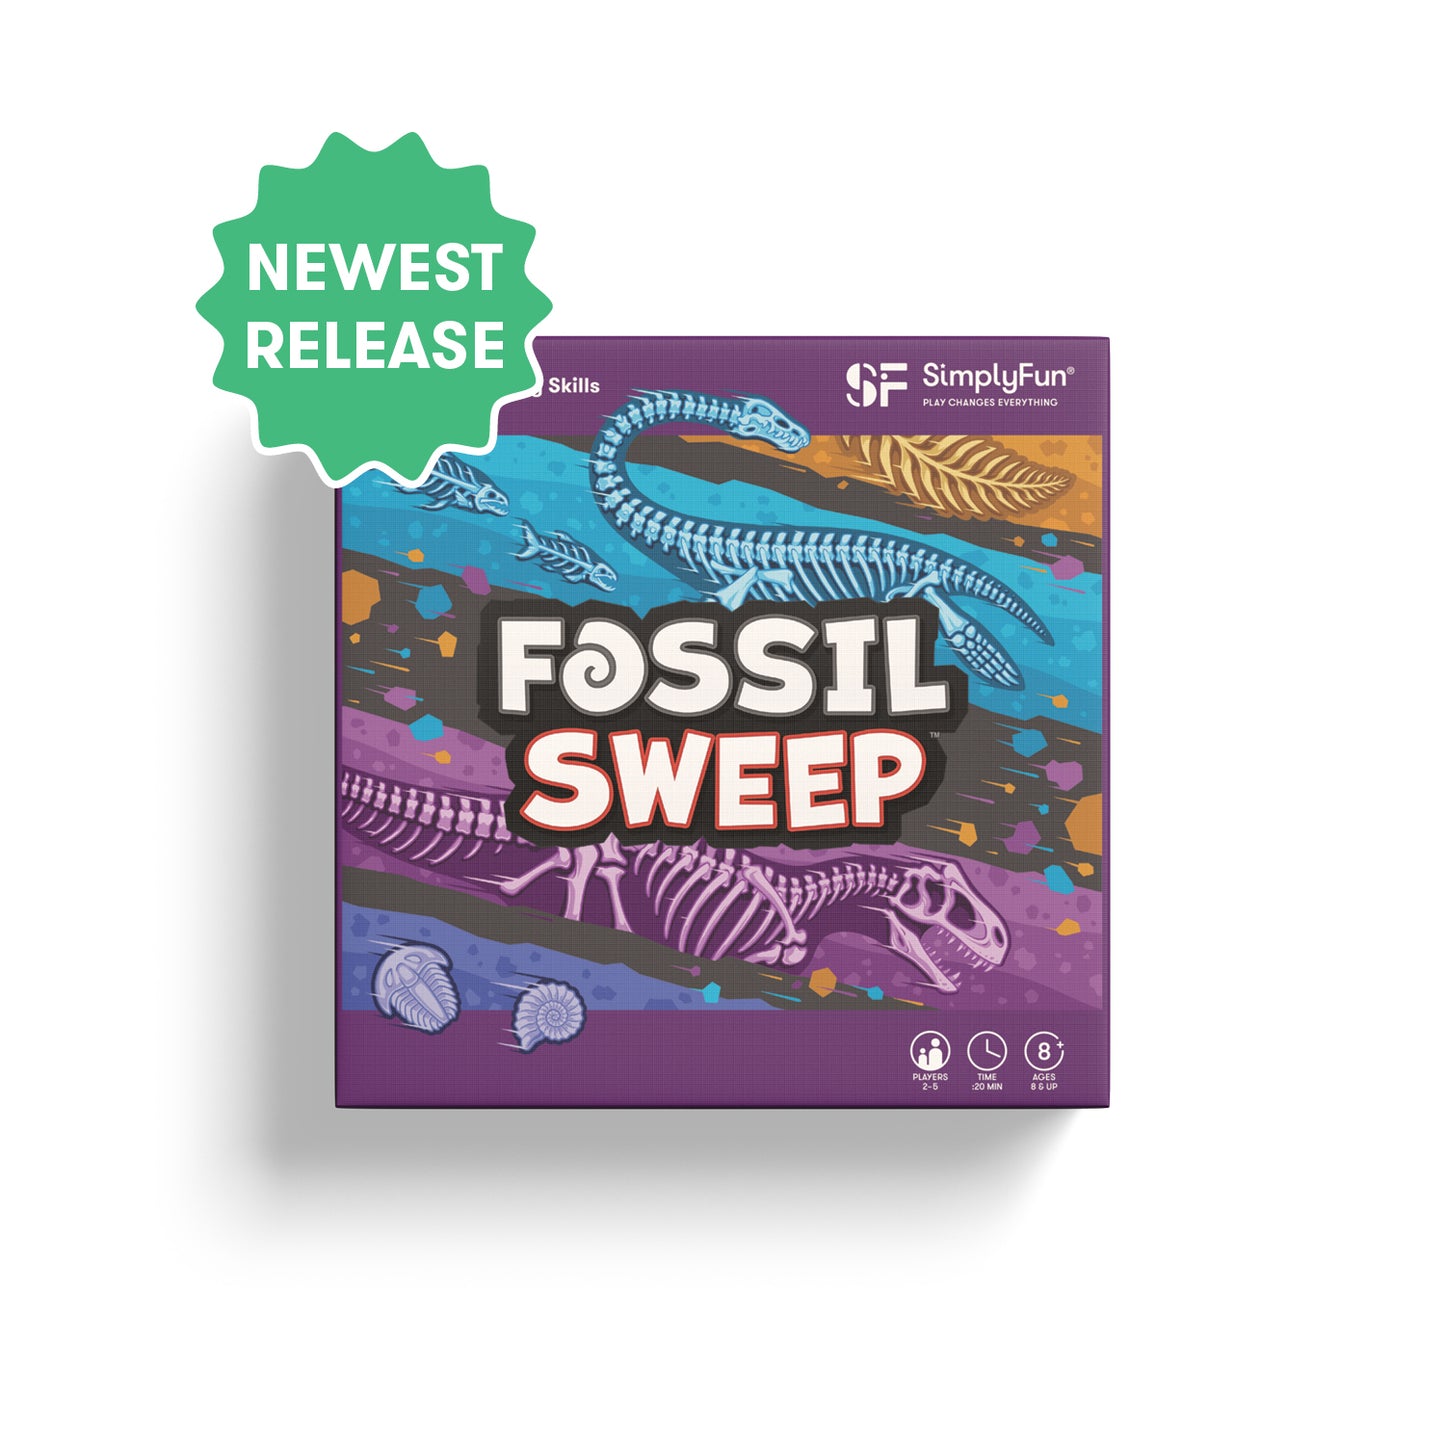 Fossil Sweep by SimplyFun, a fun fossil-themed card game for ages 8 and up.